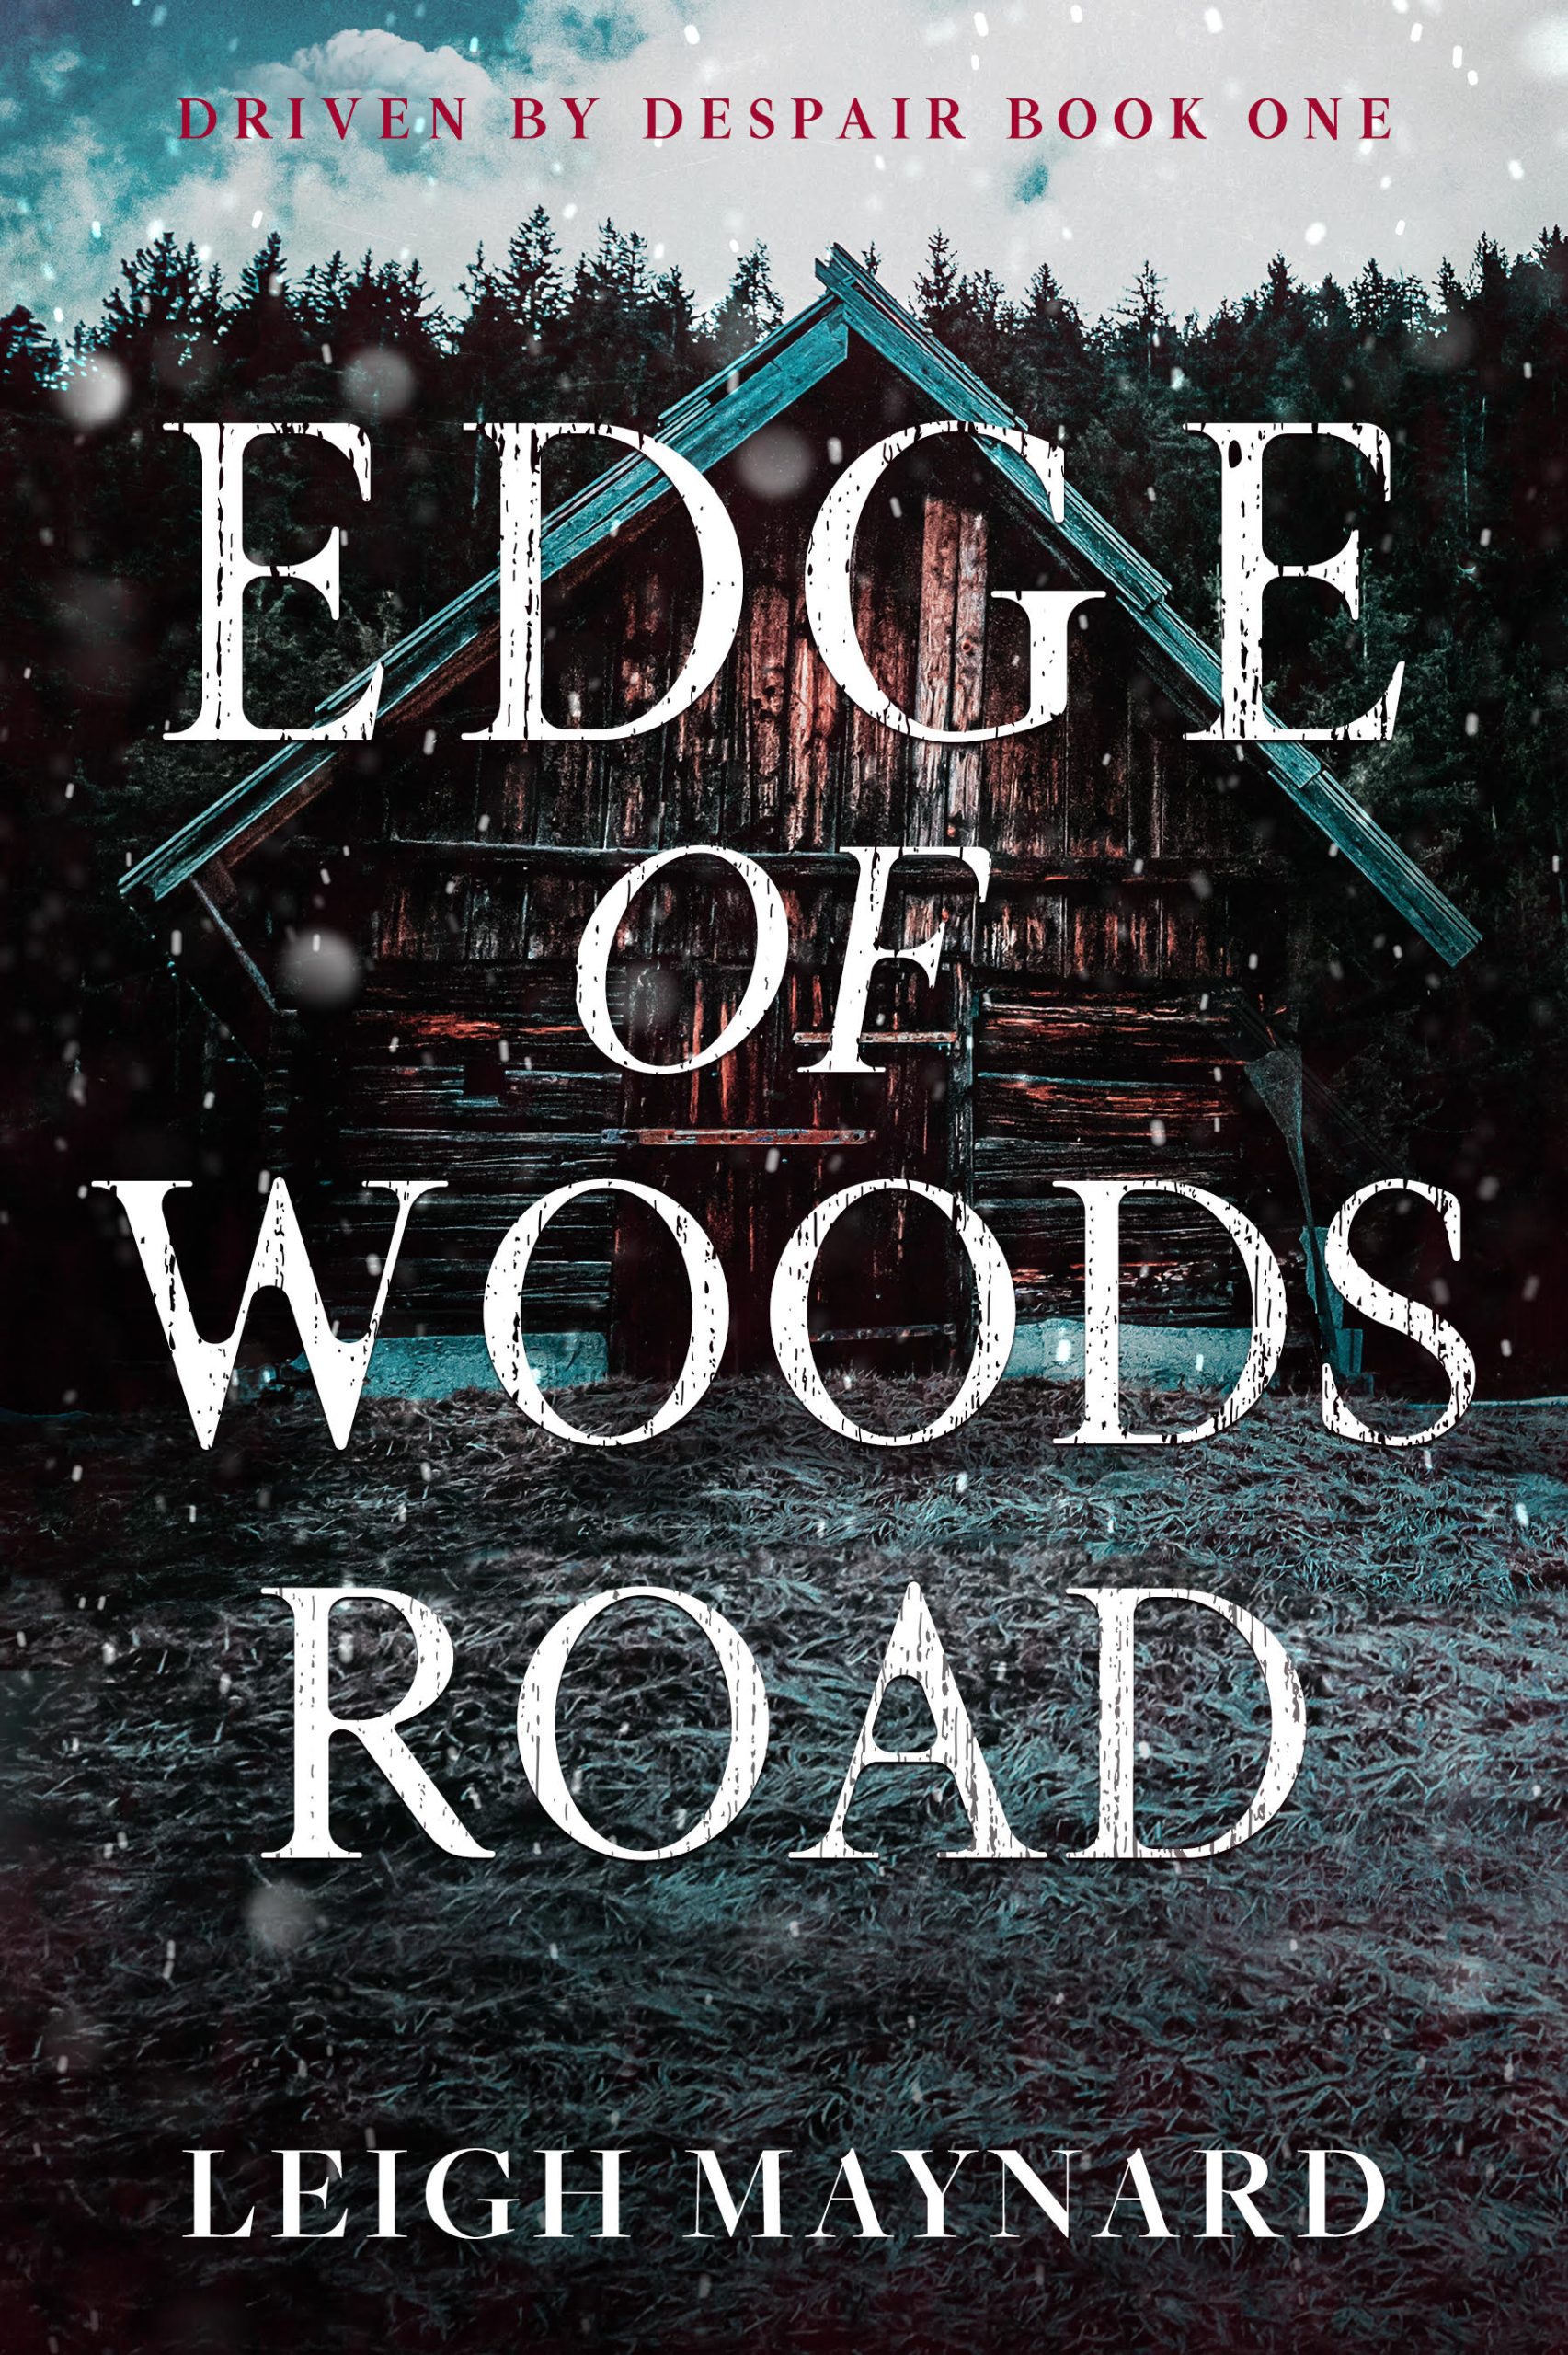 Edge of Woods Road by Leigh Maynard PDF Download